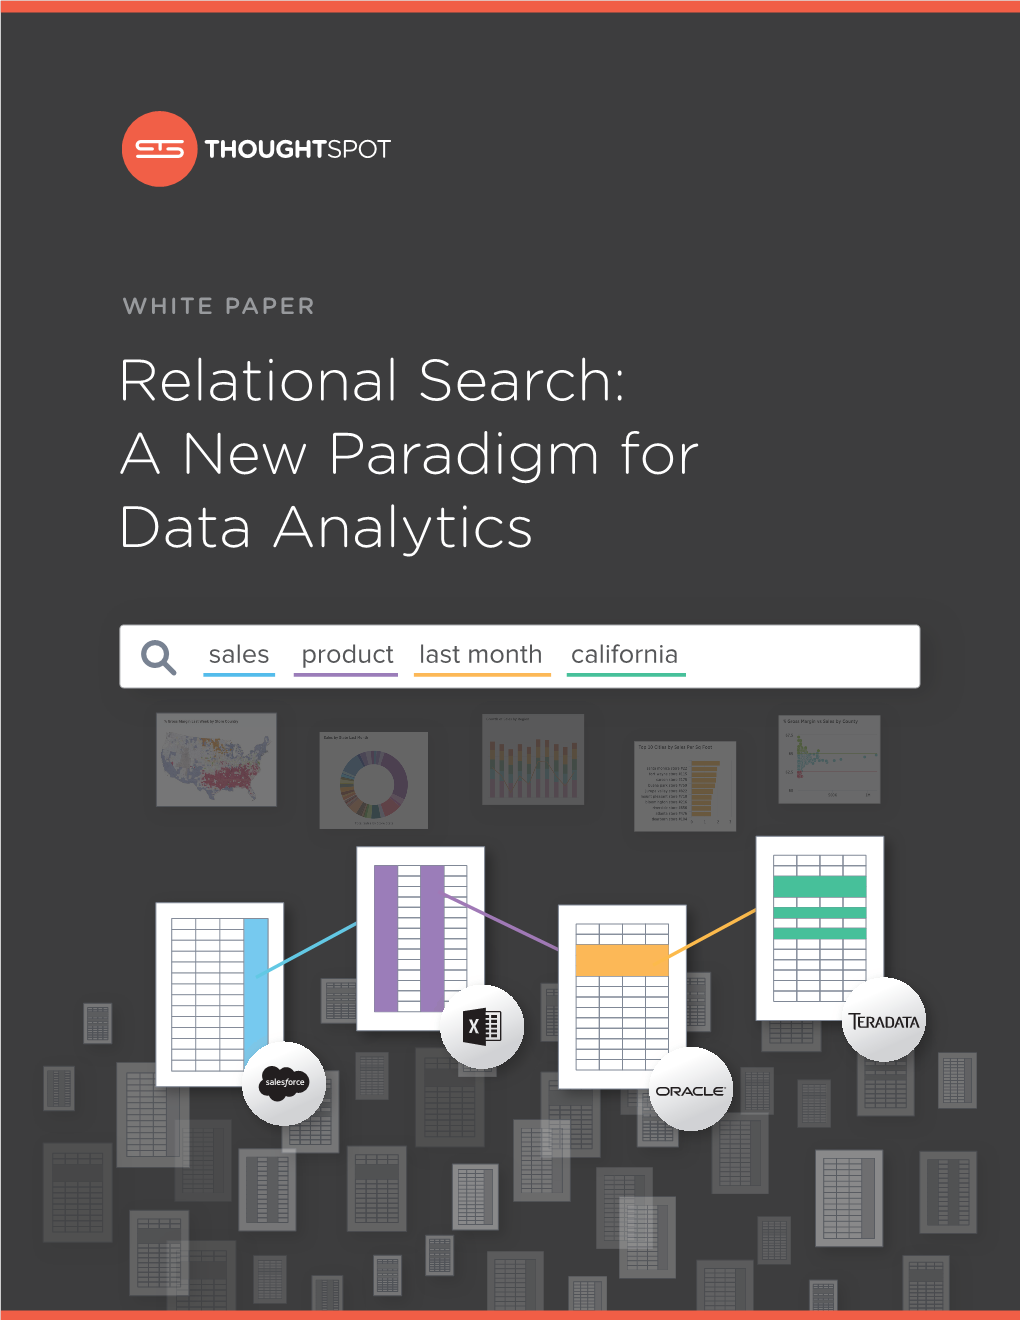 Relational Search: a New Paradigm for Data Analytics